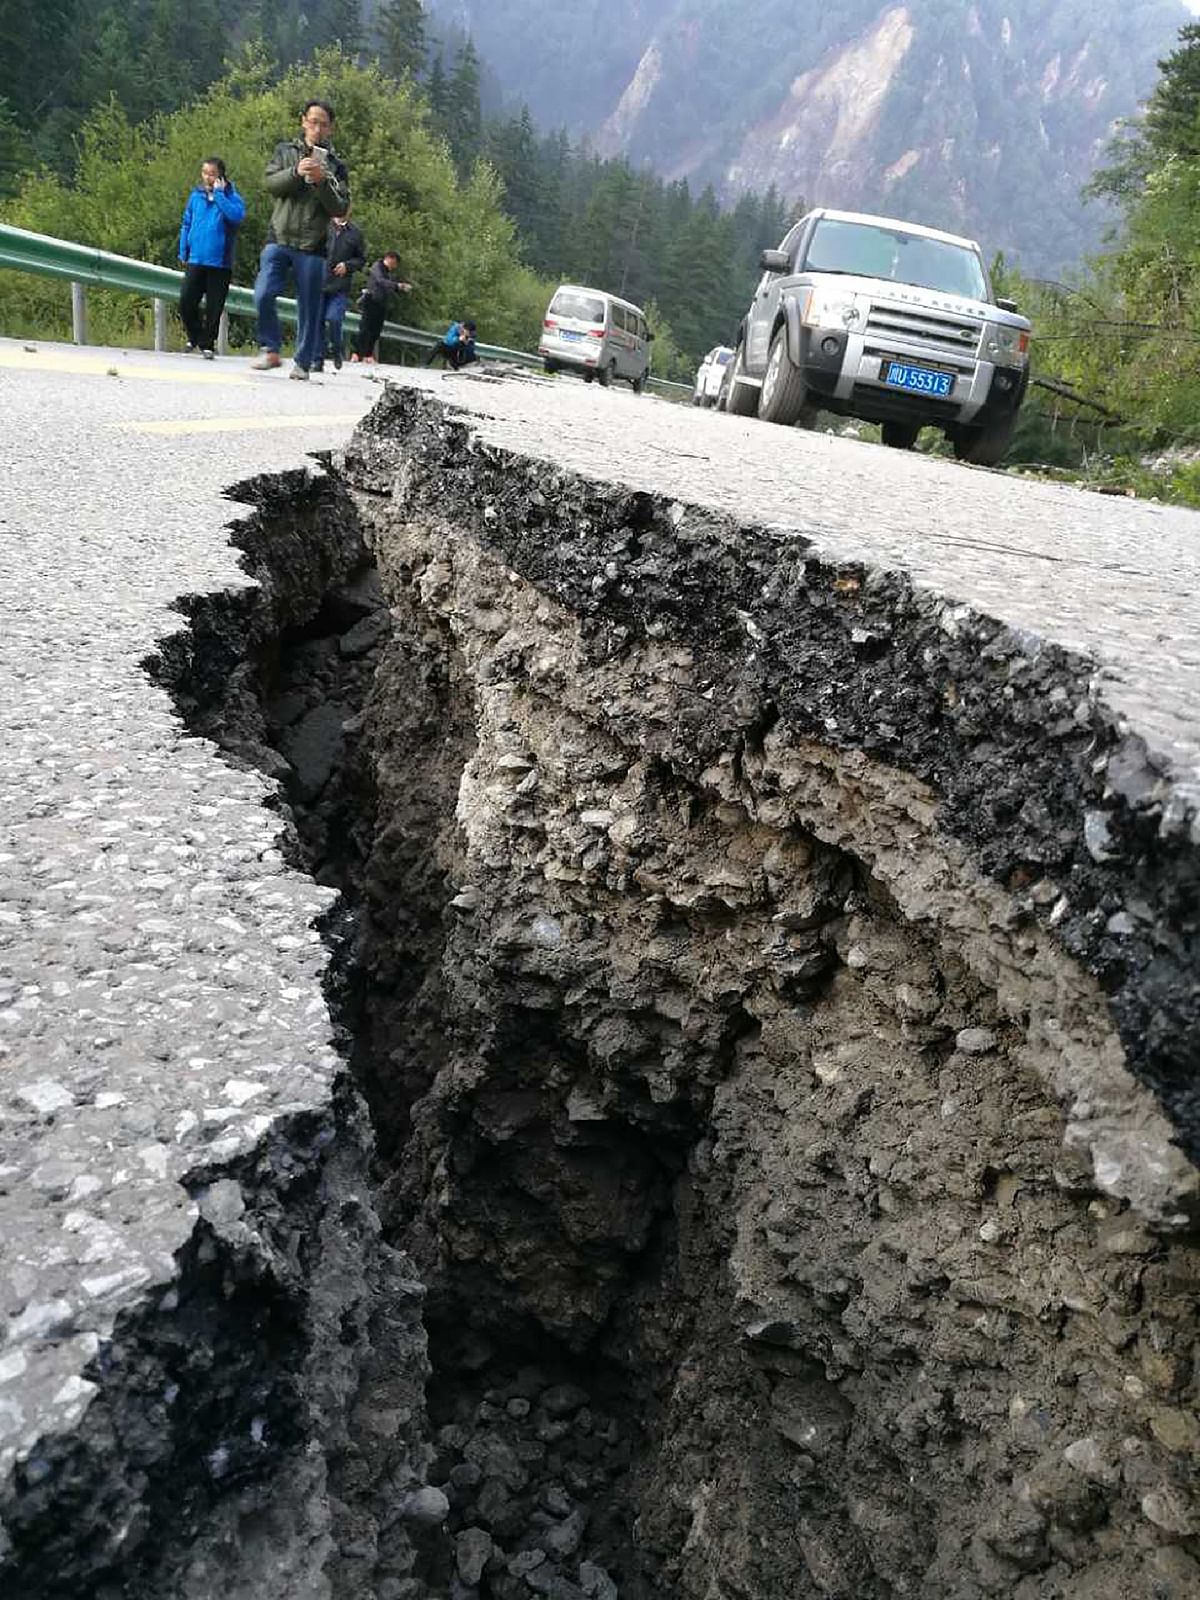 A crack, caused by an earthquake, is seen on a road in Jiuzhaigou in China’s southwestern Sichuan province. Photo: AFP